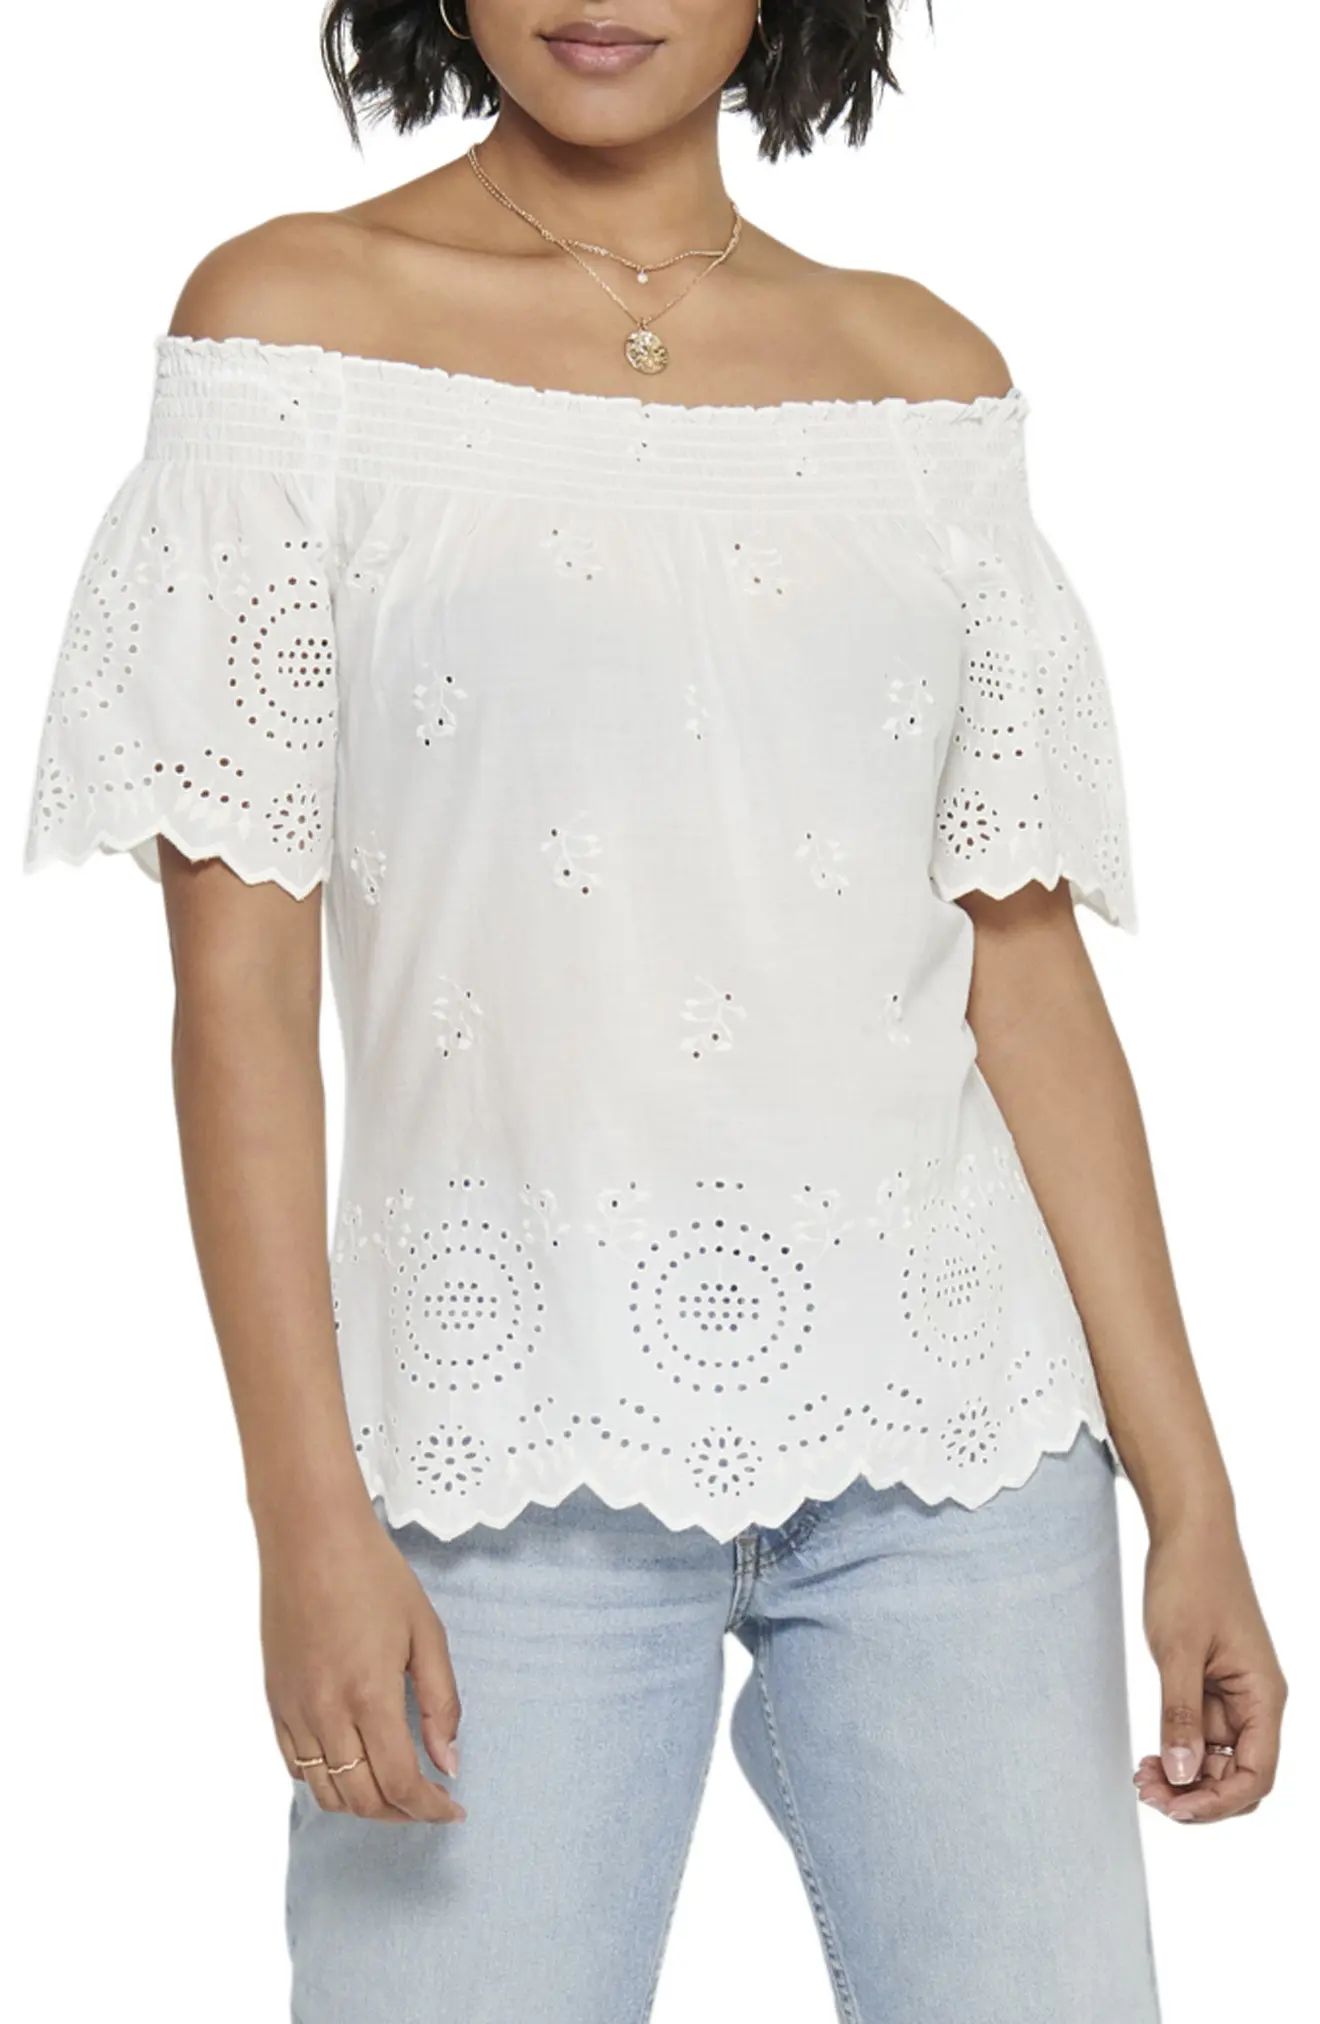 Women's Only Shery Eyelet Off The Shoulder Top, Size 8 US - White | Nordstrom